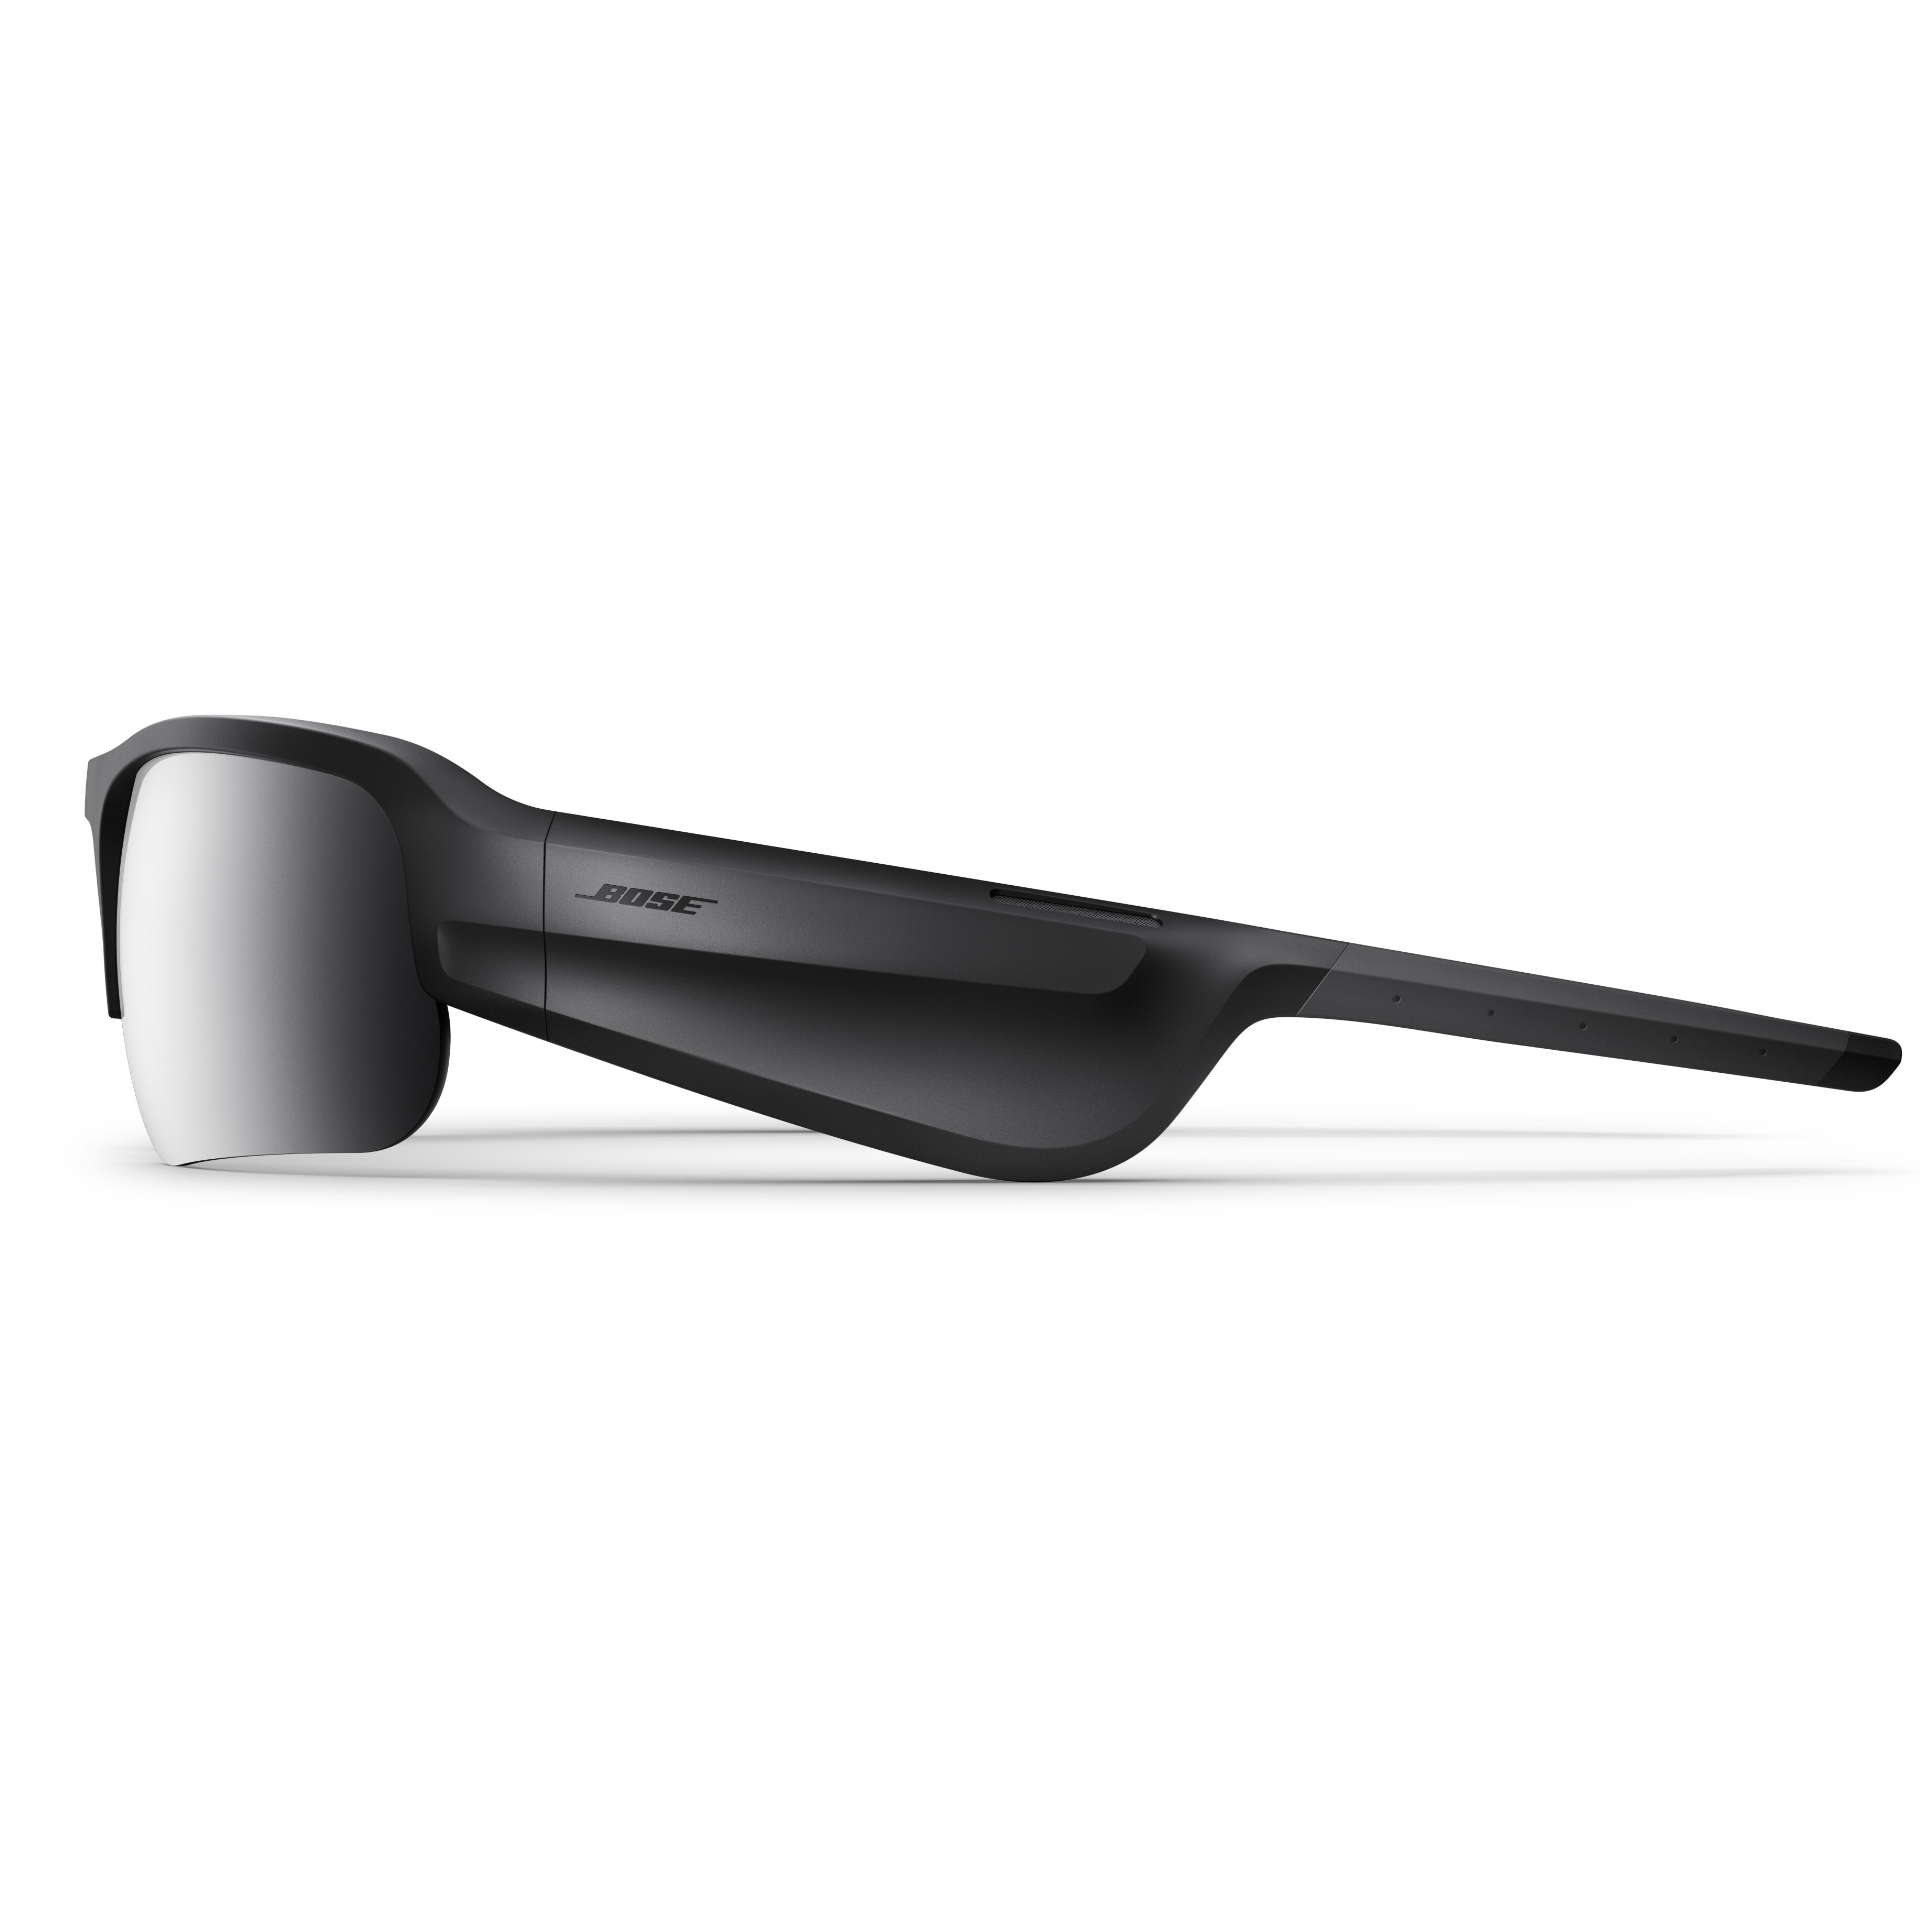 Bose Frames Tempo Bluetooth Sports Sunglasses with Polarized Lenses, Black - image 12 of 13